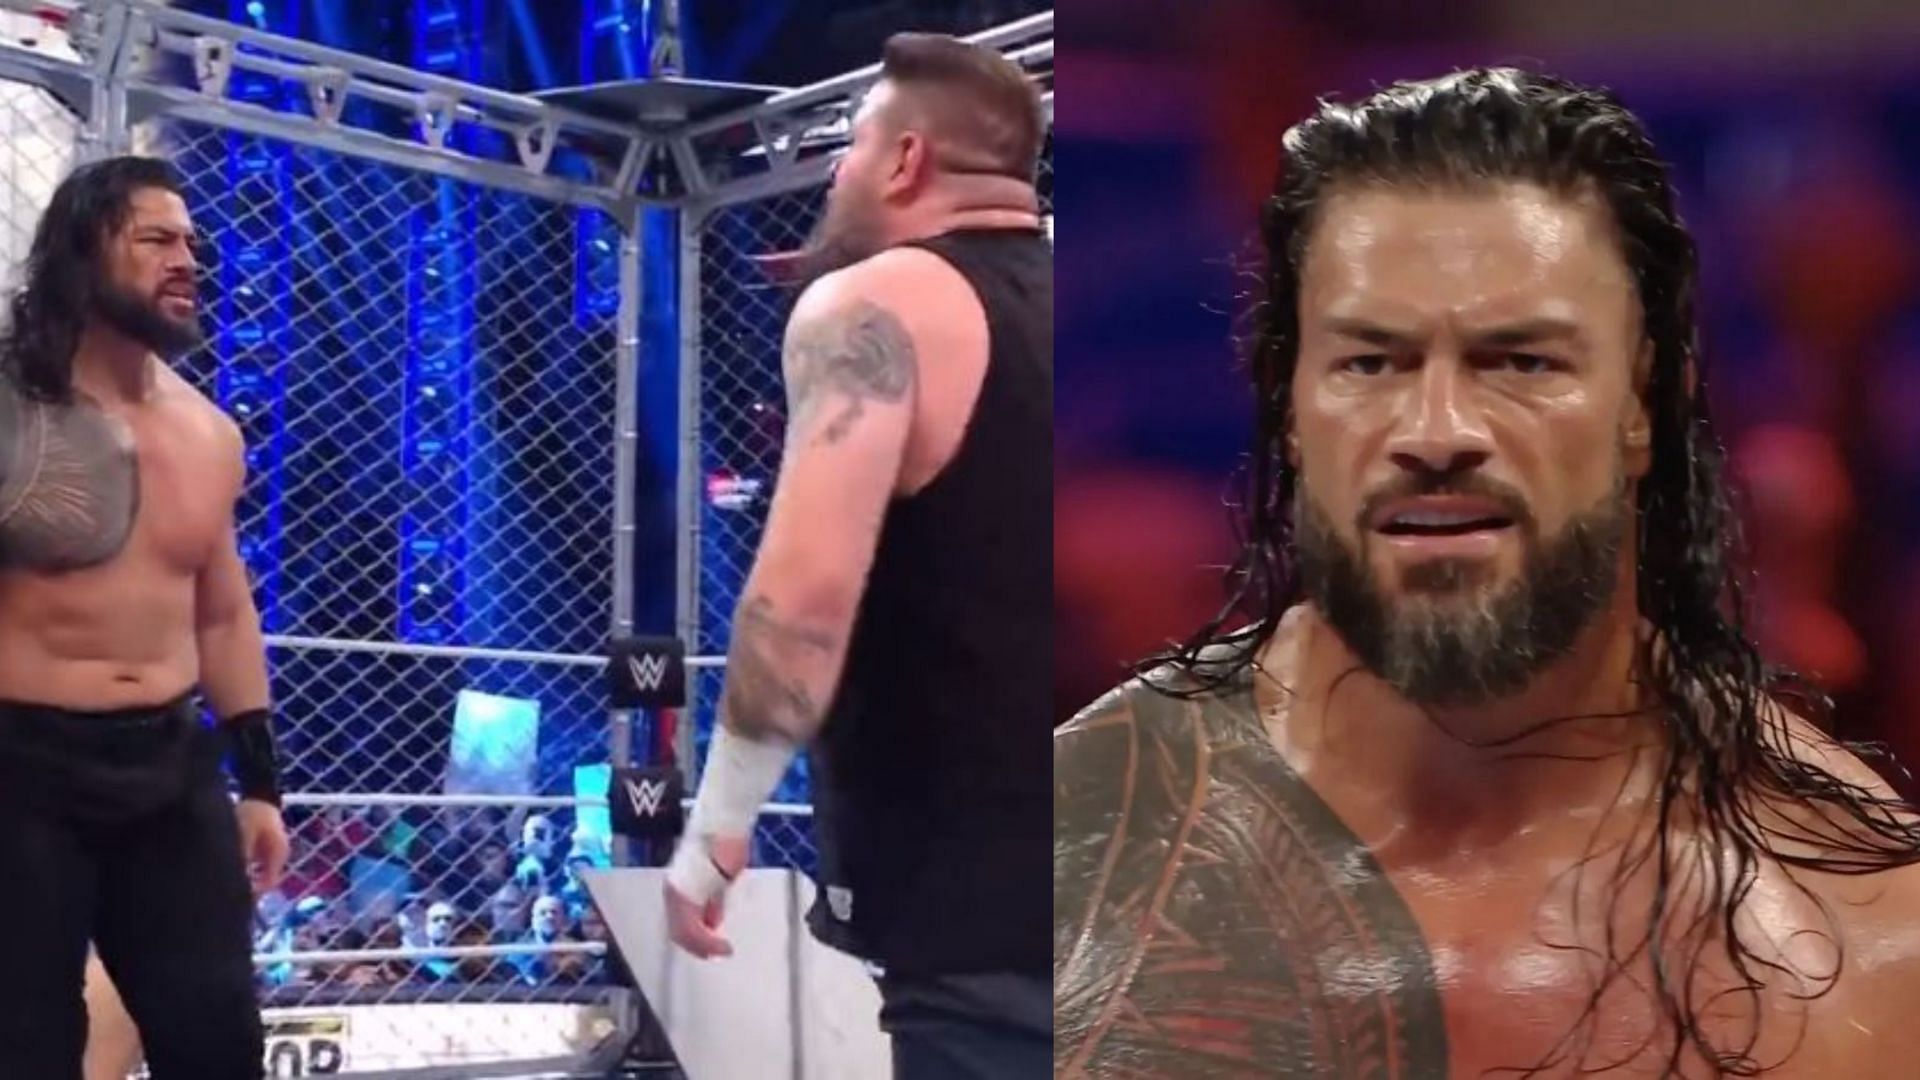 Roman Reigns reportedly suffered an injury at WWE Survivor Series